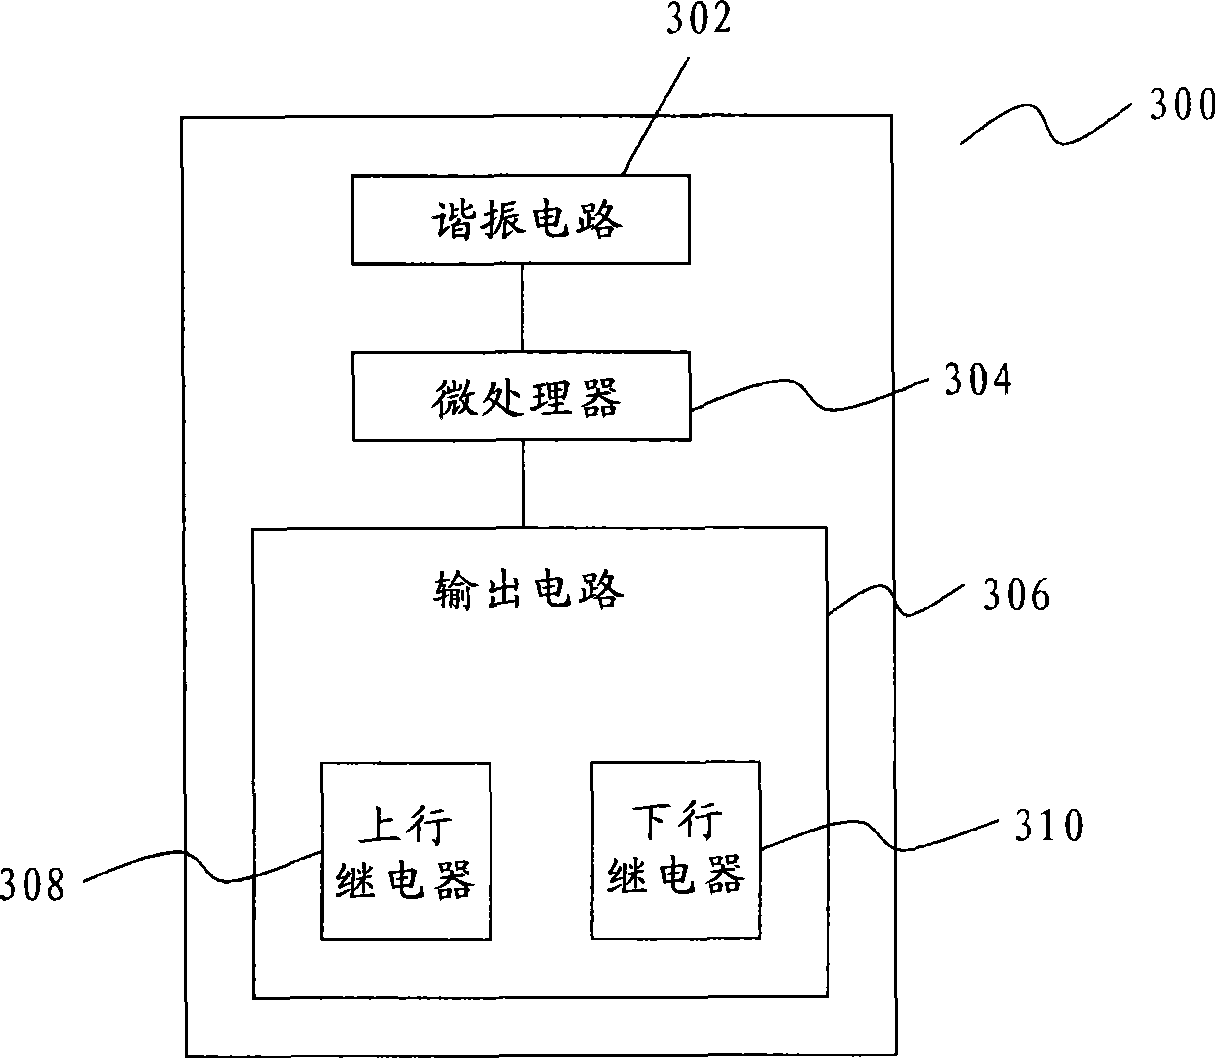 Smart card, apparatus method and system for controlling escalator